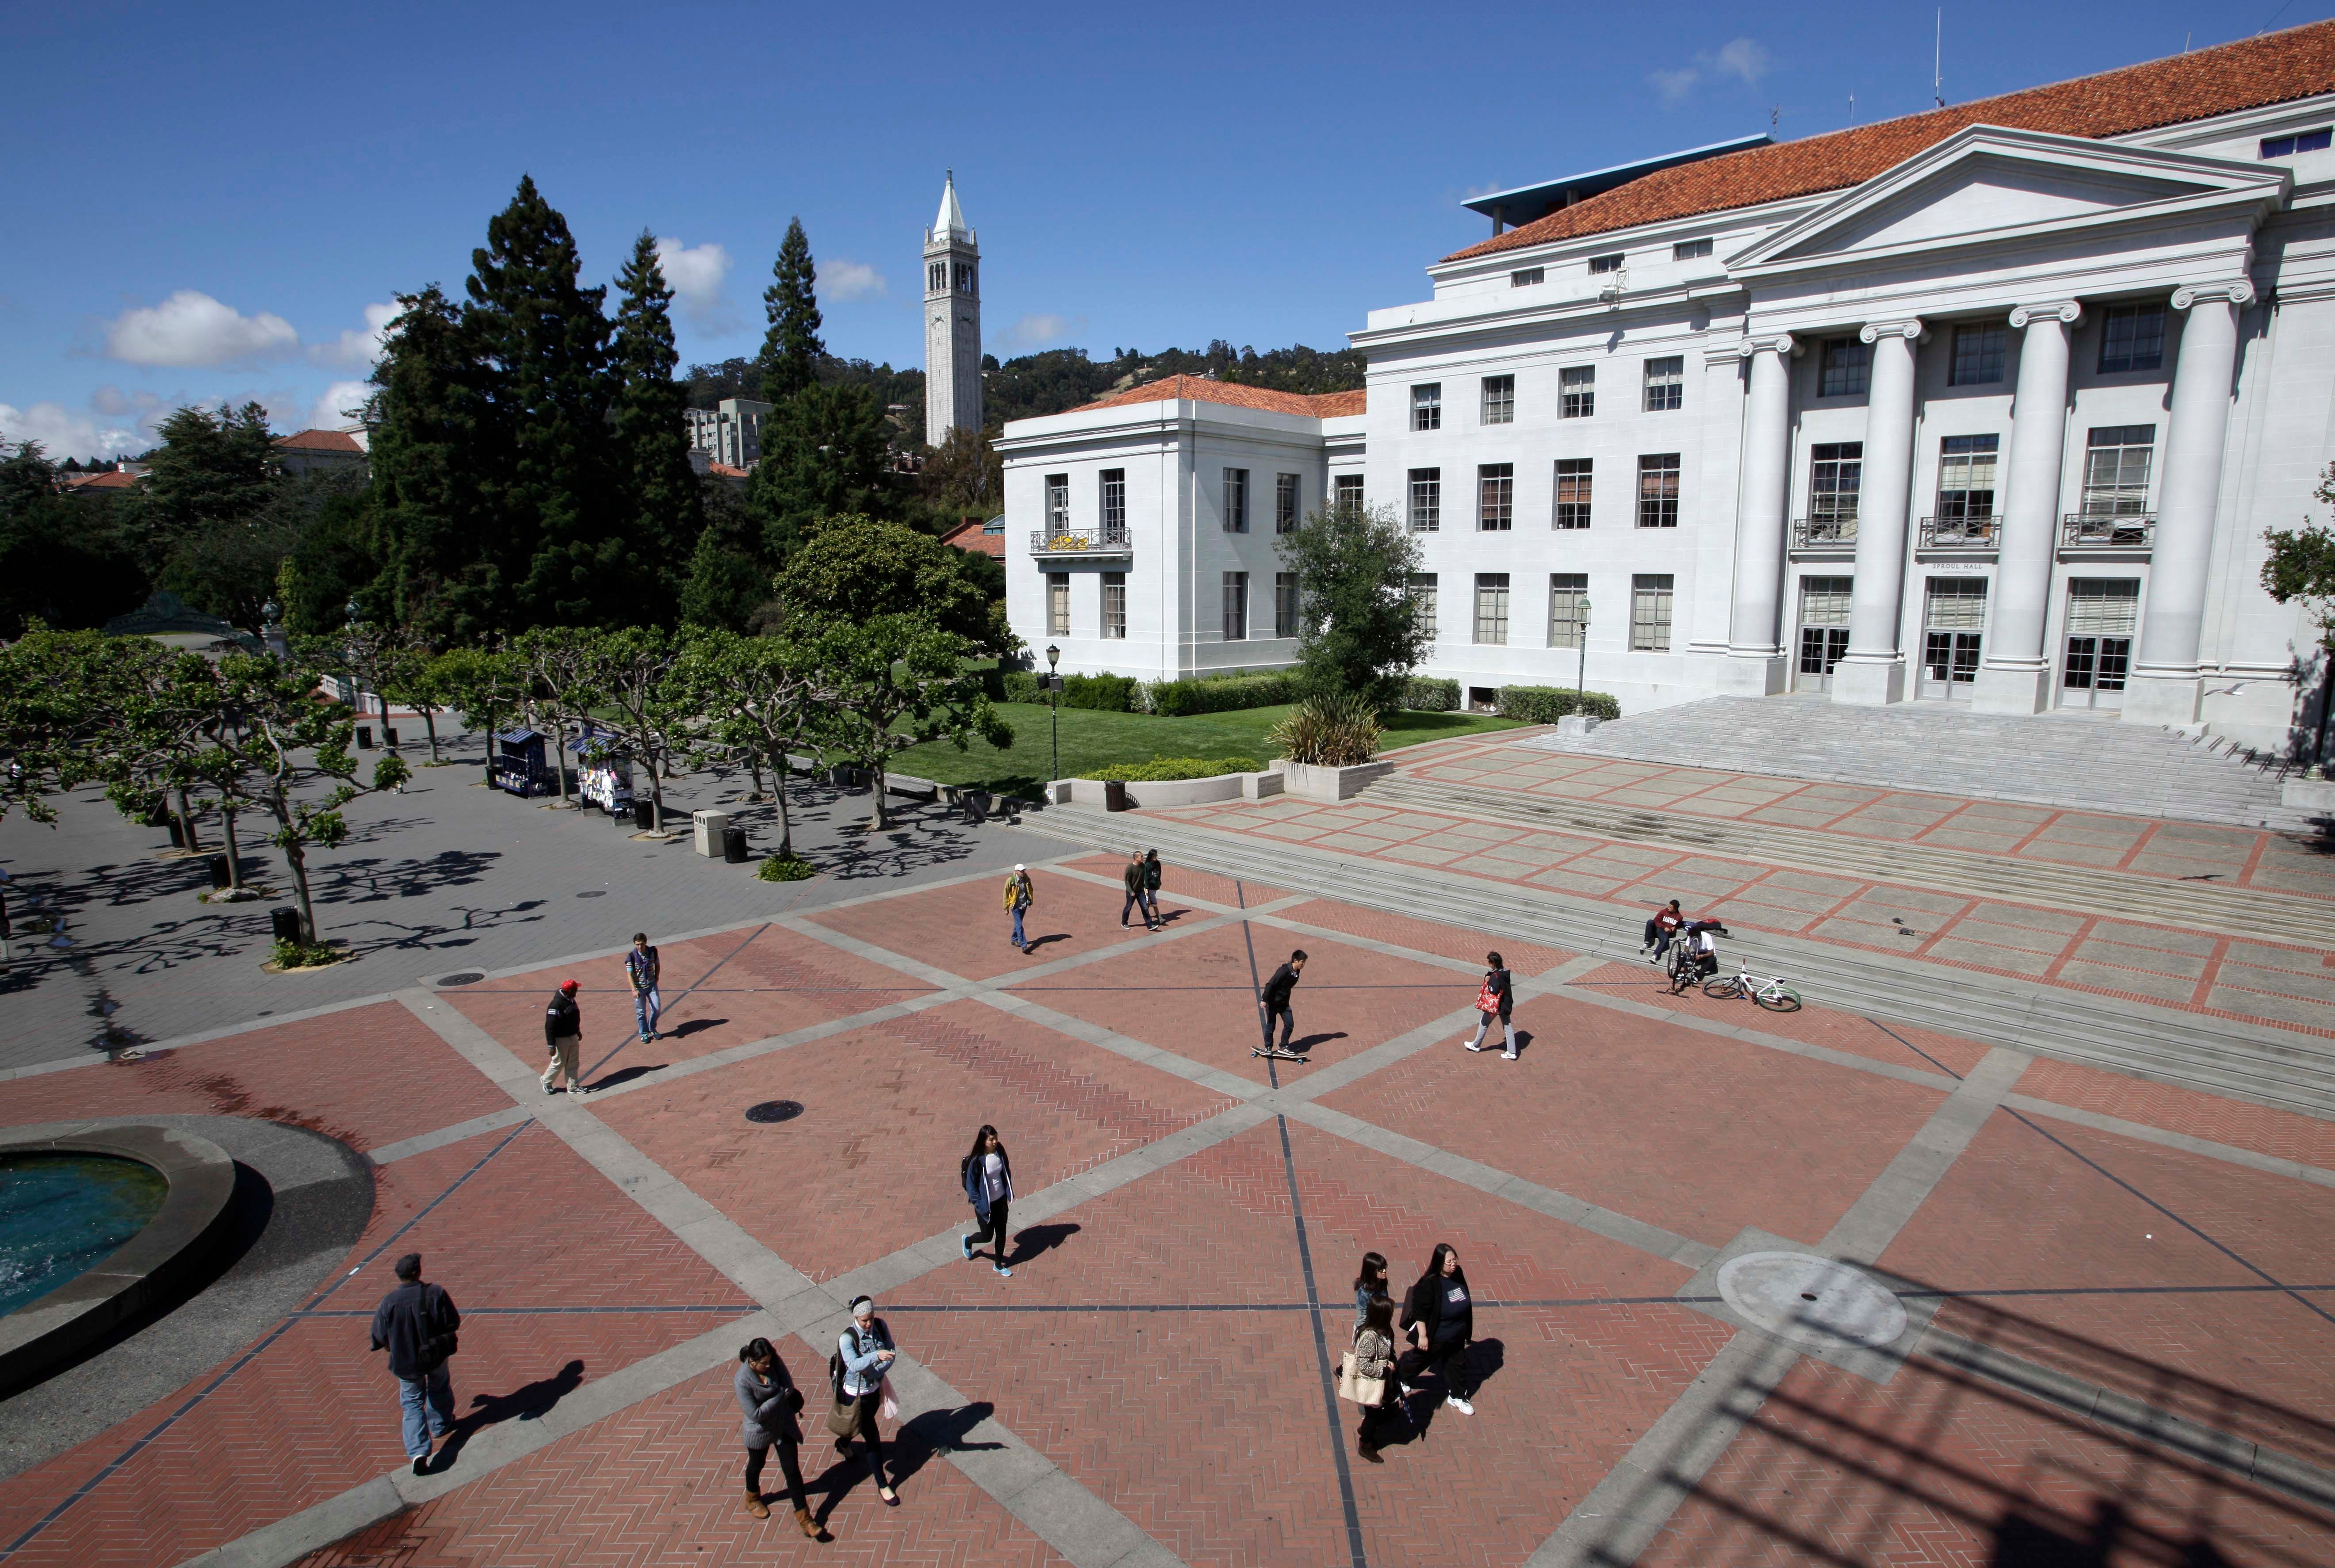 Sproul Hall on the campus of the University of California at Berkeley is a symbol of the Free Speech Movement of the 1960s.